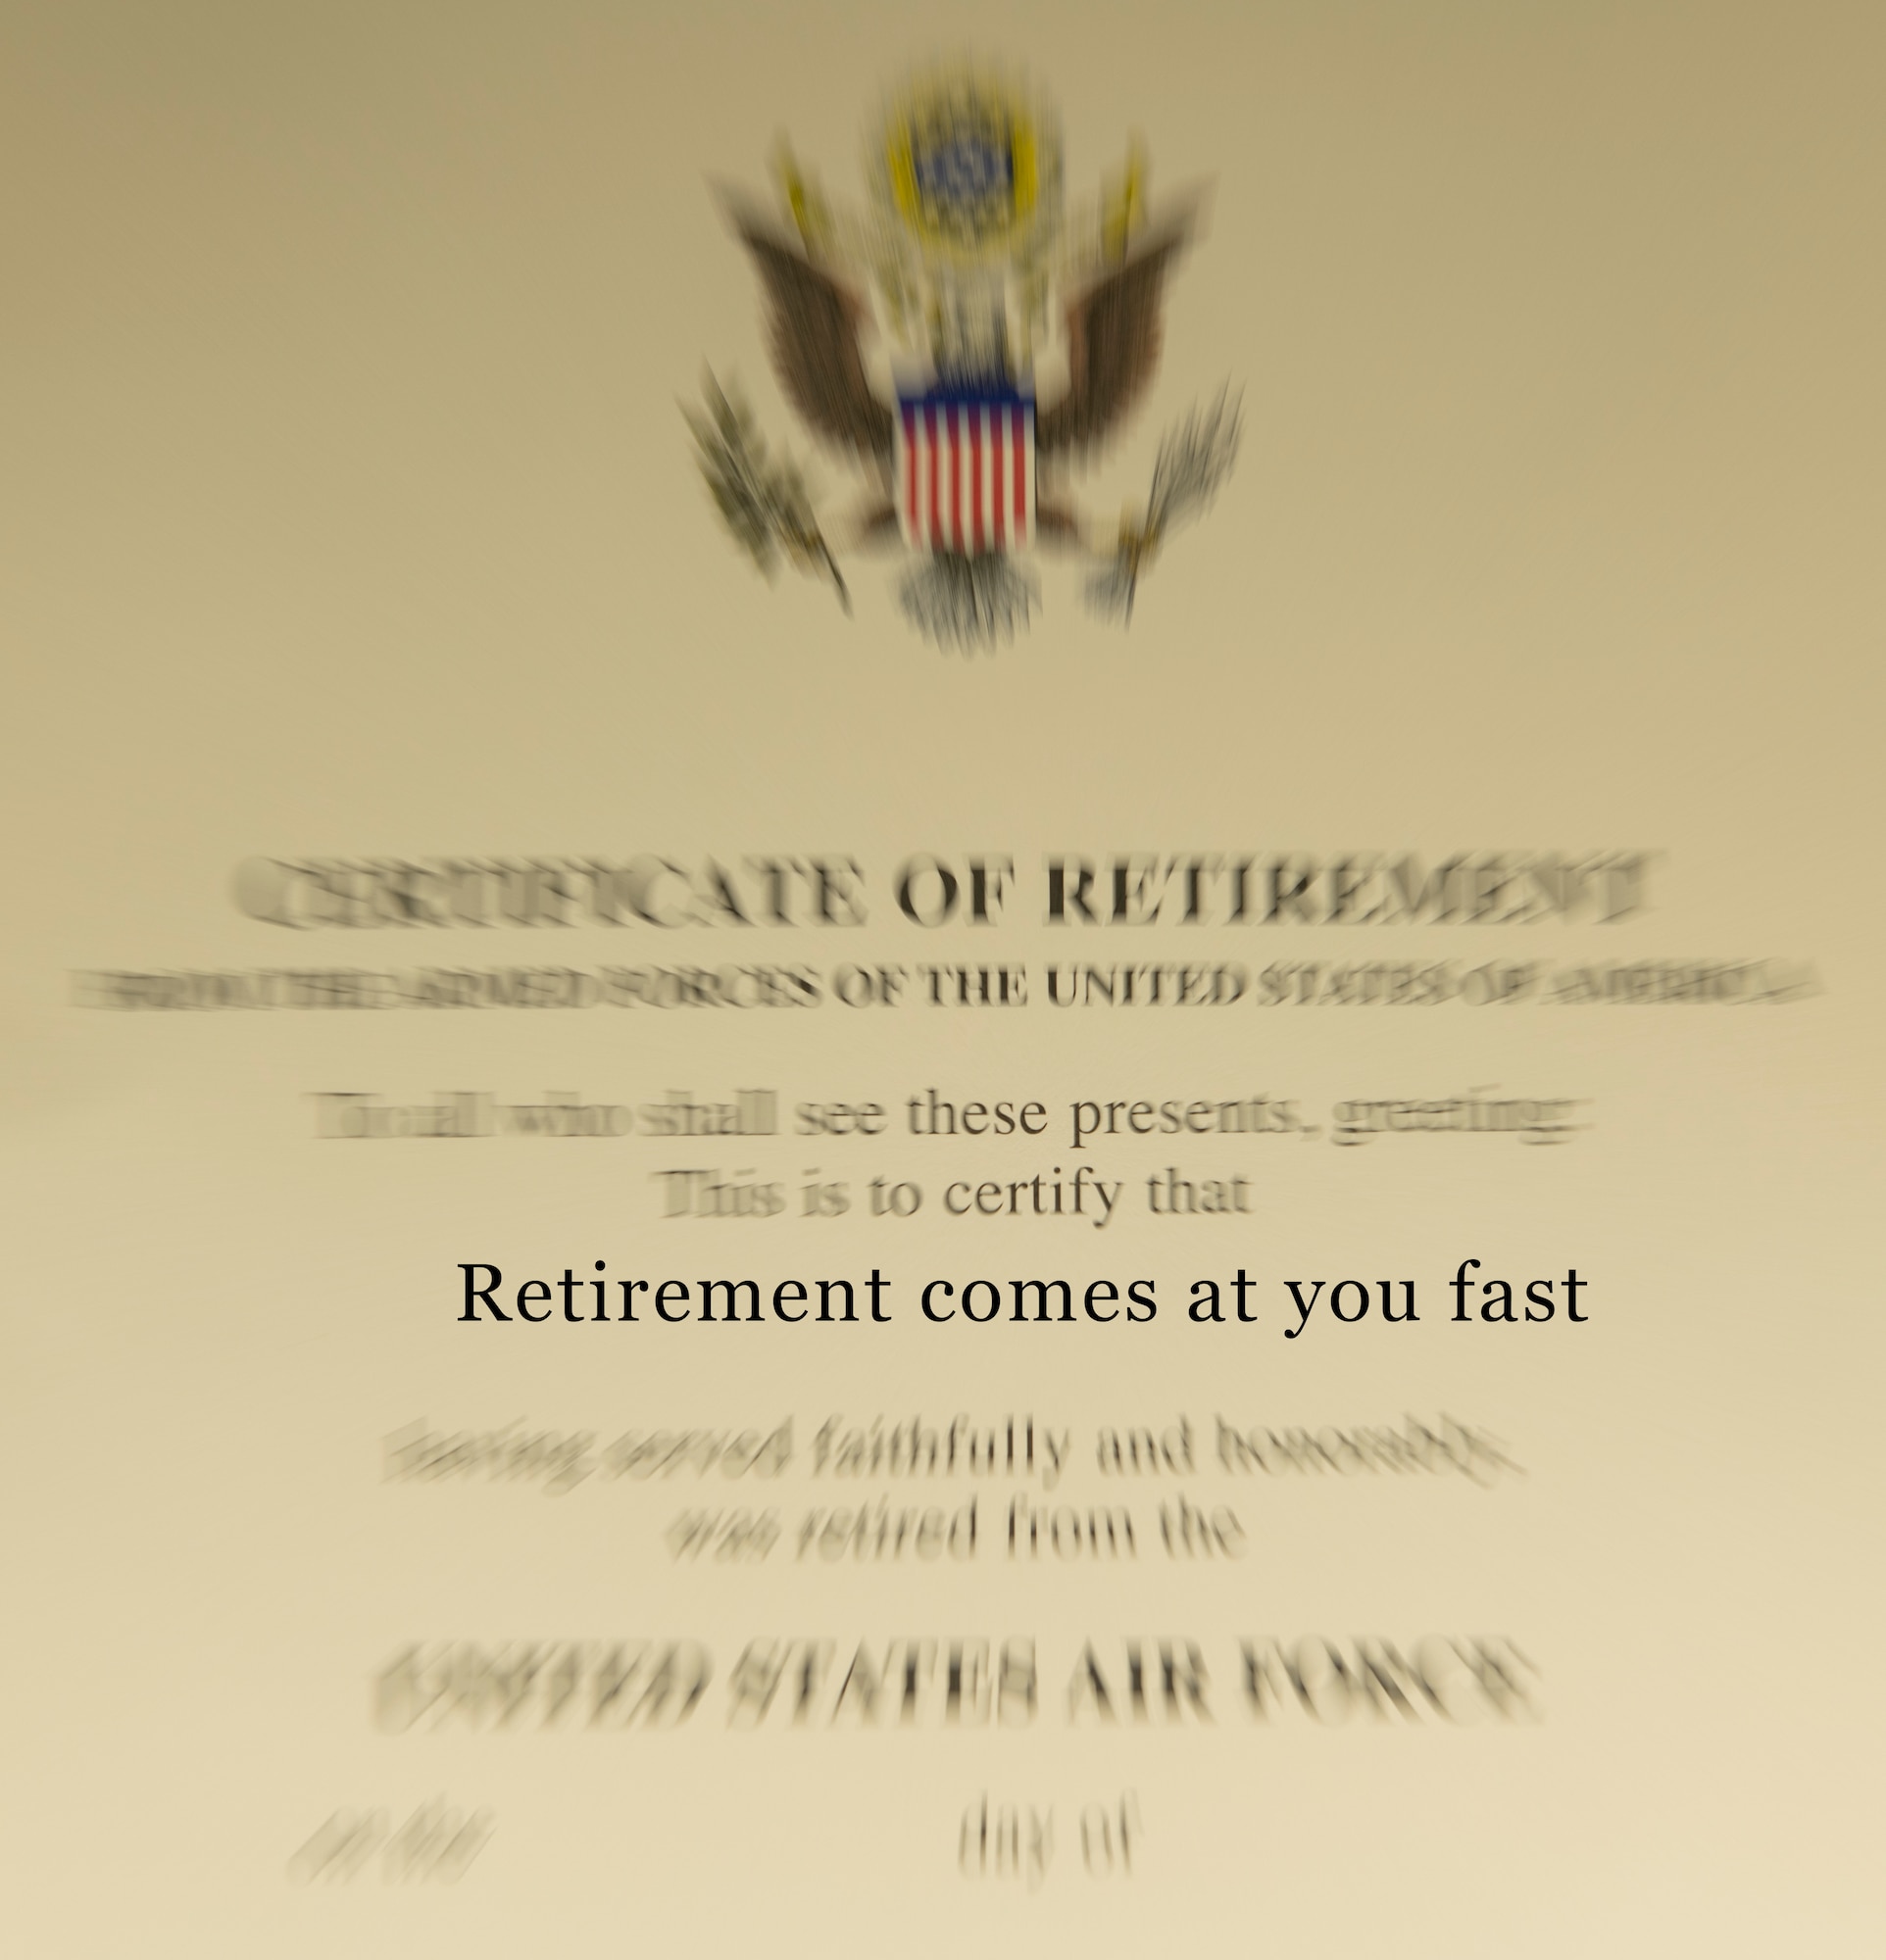 An image of a retirement certificate blurred to indicate the fast passing of time with the words "retirement comes at you fast" completely in focus.